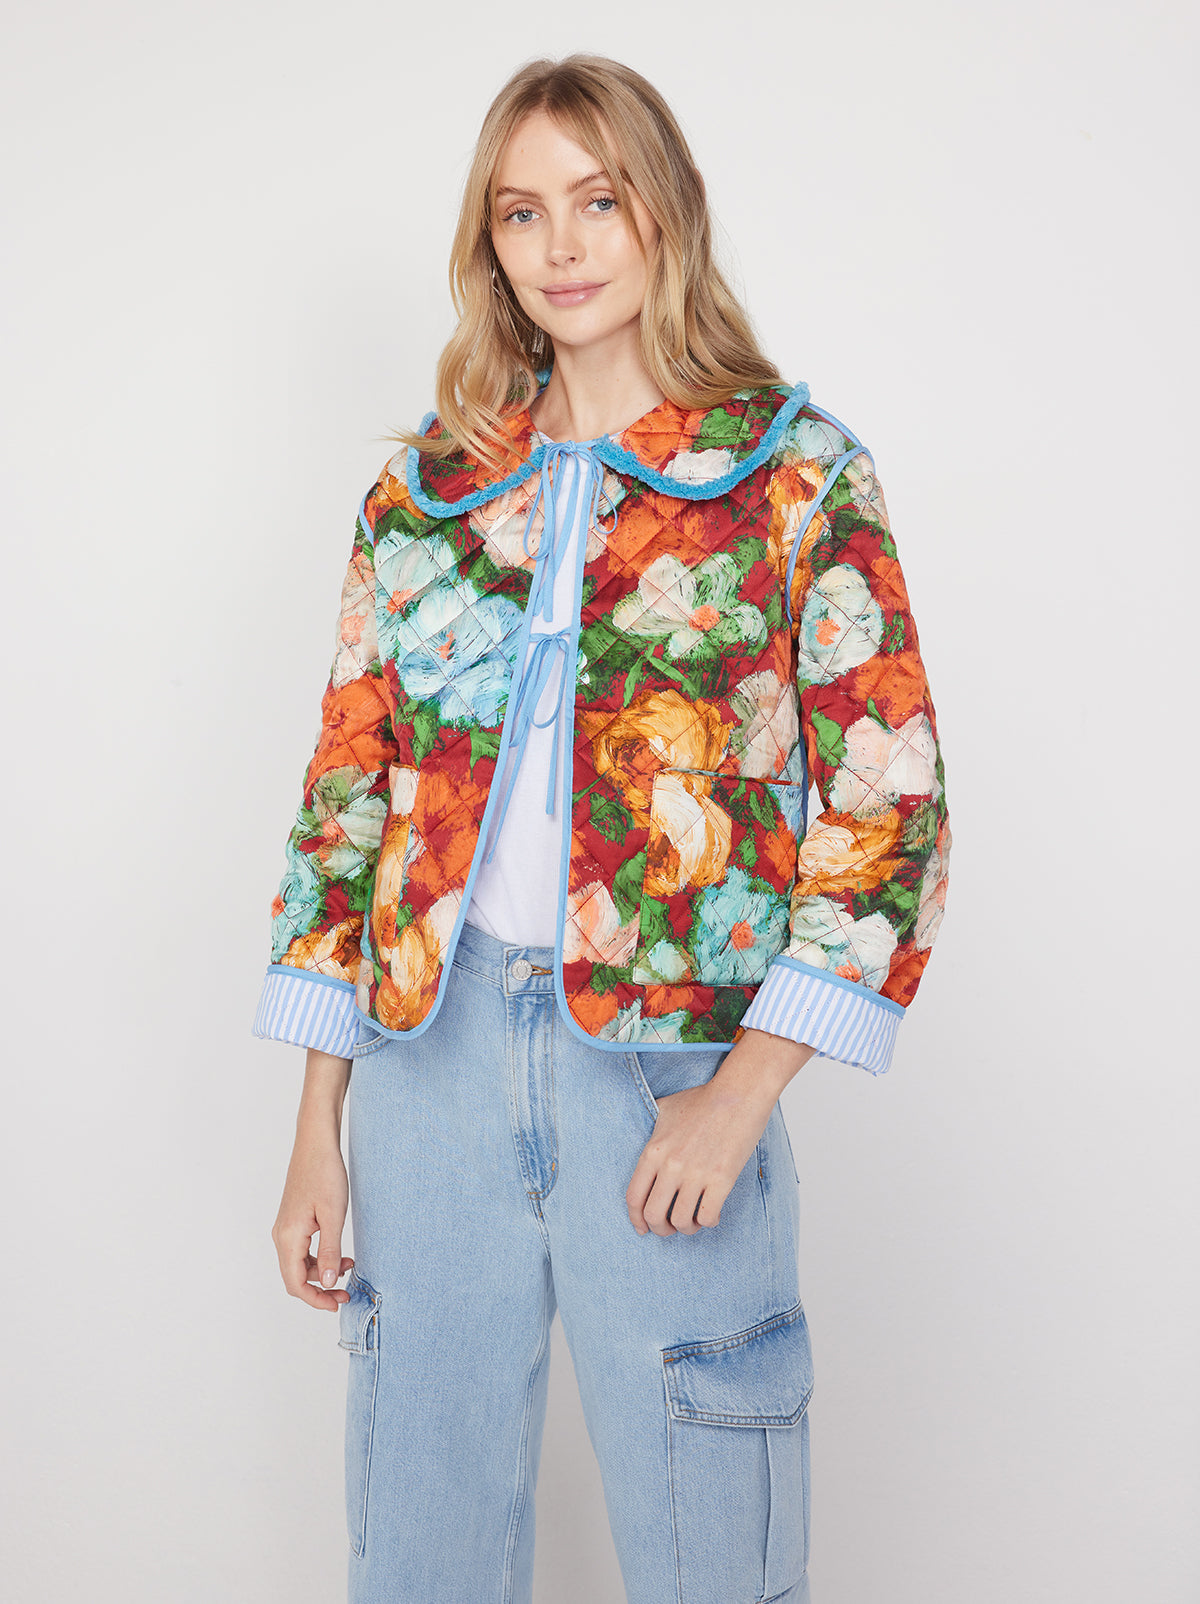 Piper Blue Impressionist Floral Print Reversible Quilted Jacket By KITRI Studio